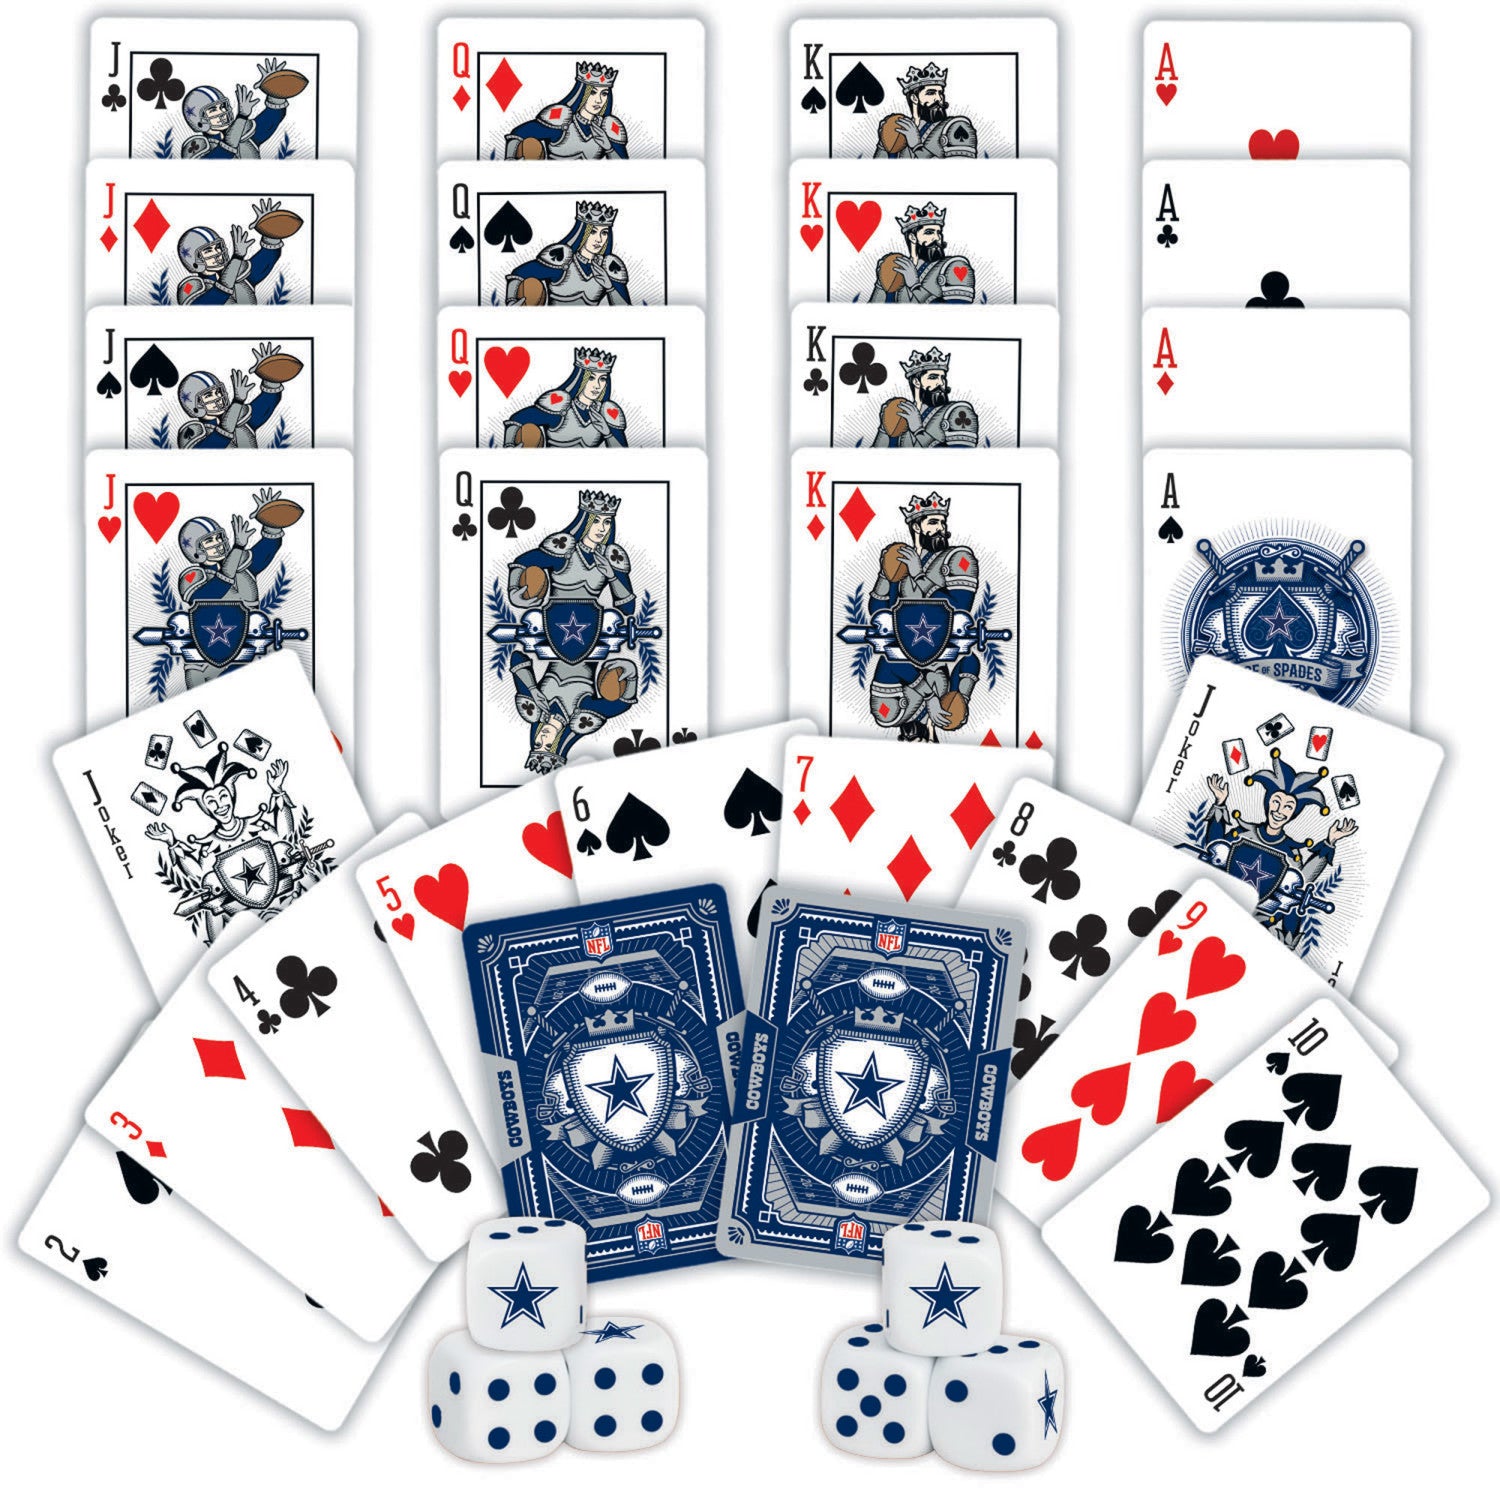 Dallas Cowboys - 2-Pack Playing Cards & Dice Set